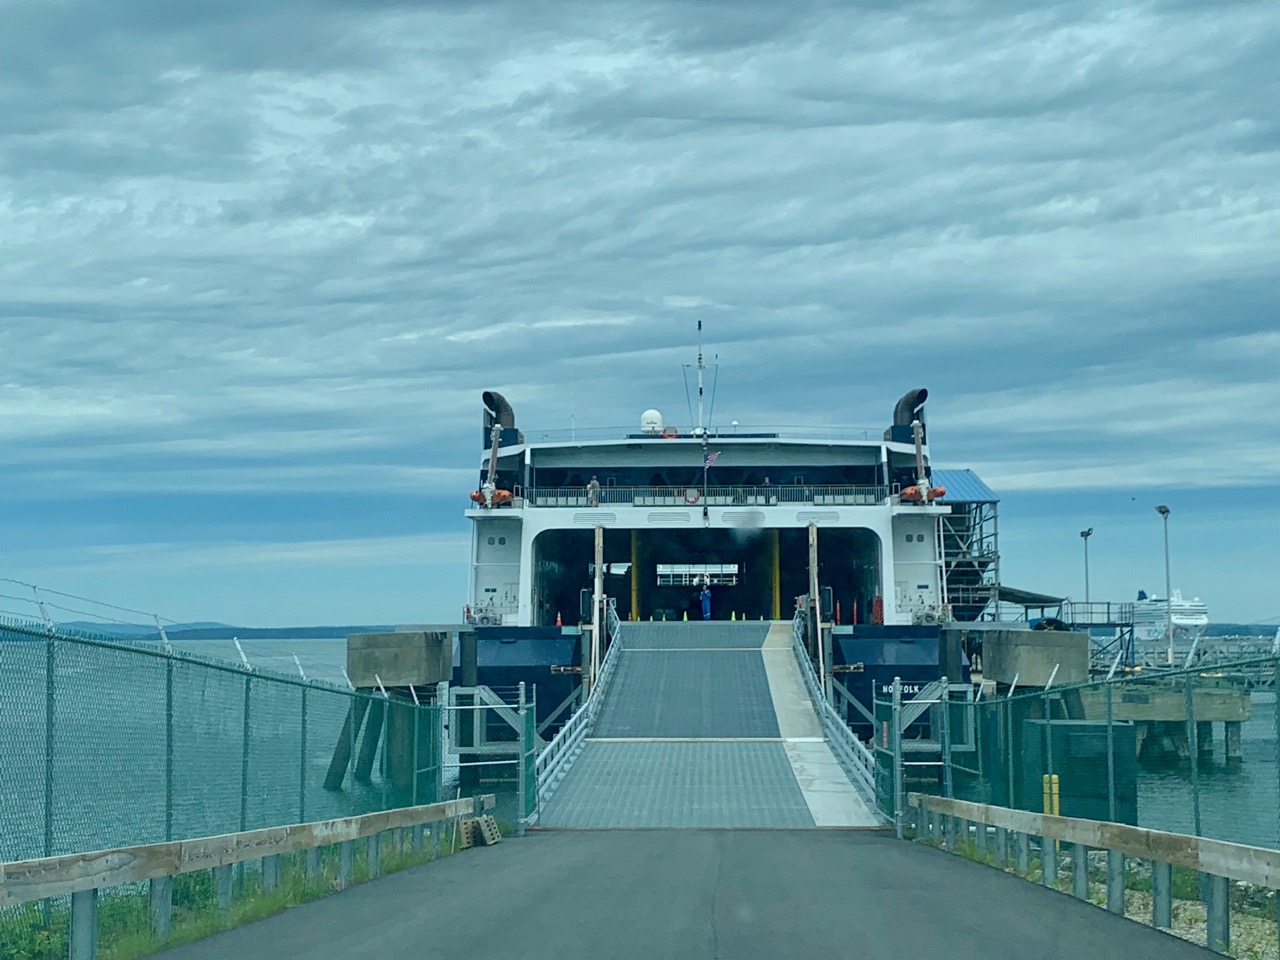 View from a car approaching to board The Cat ferry